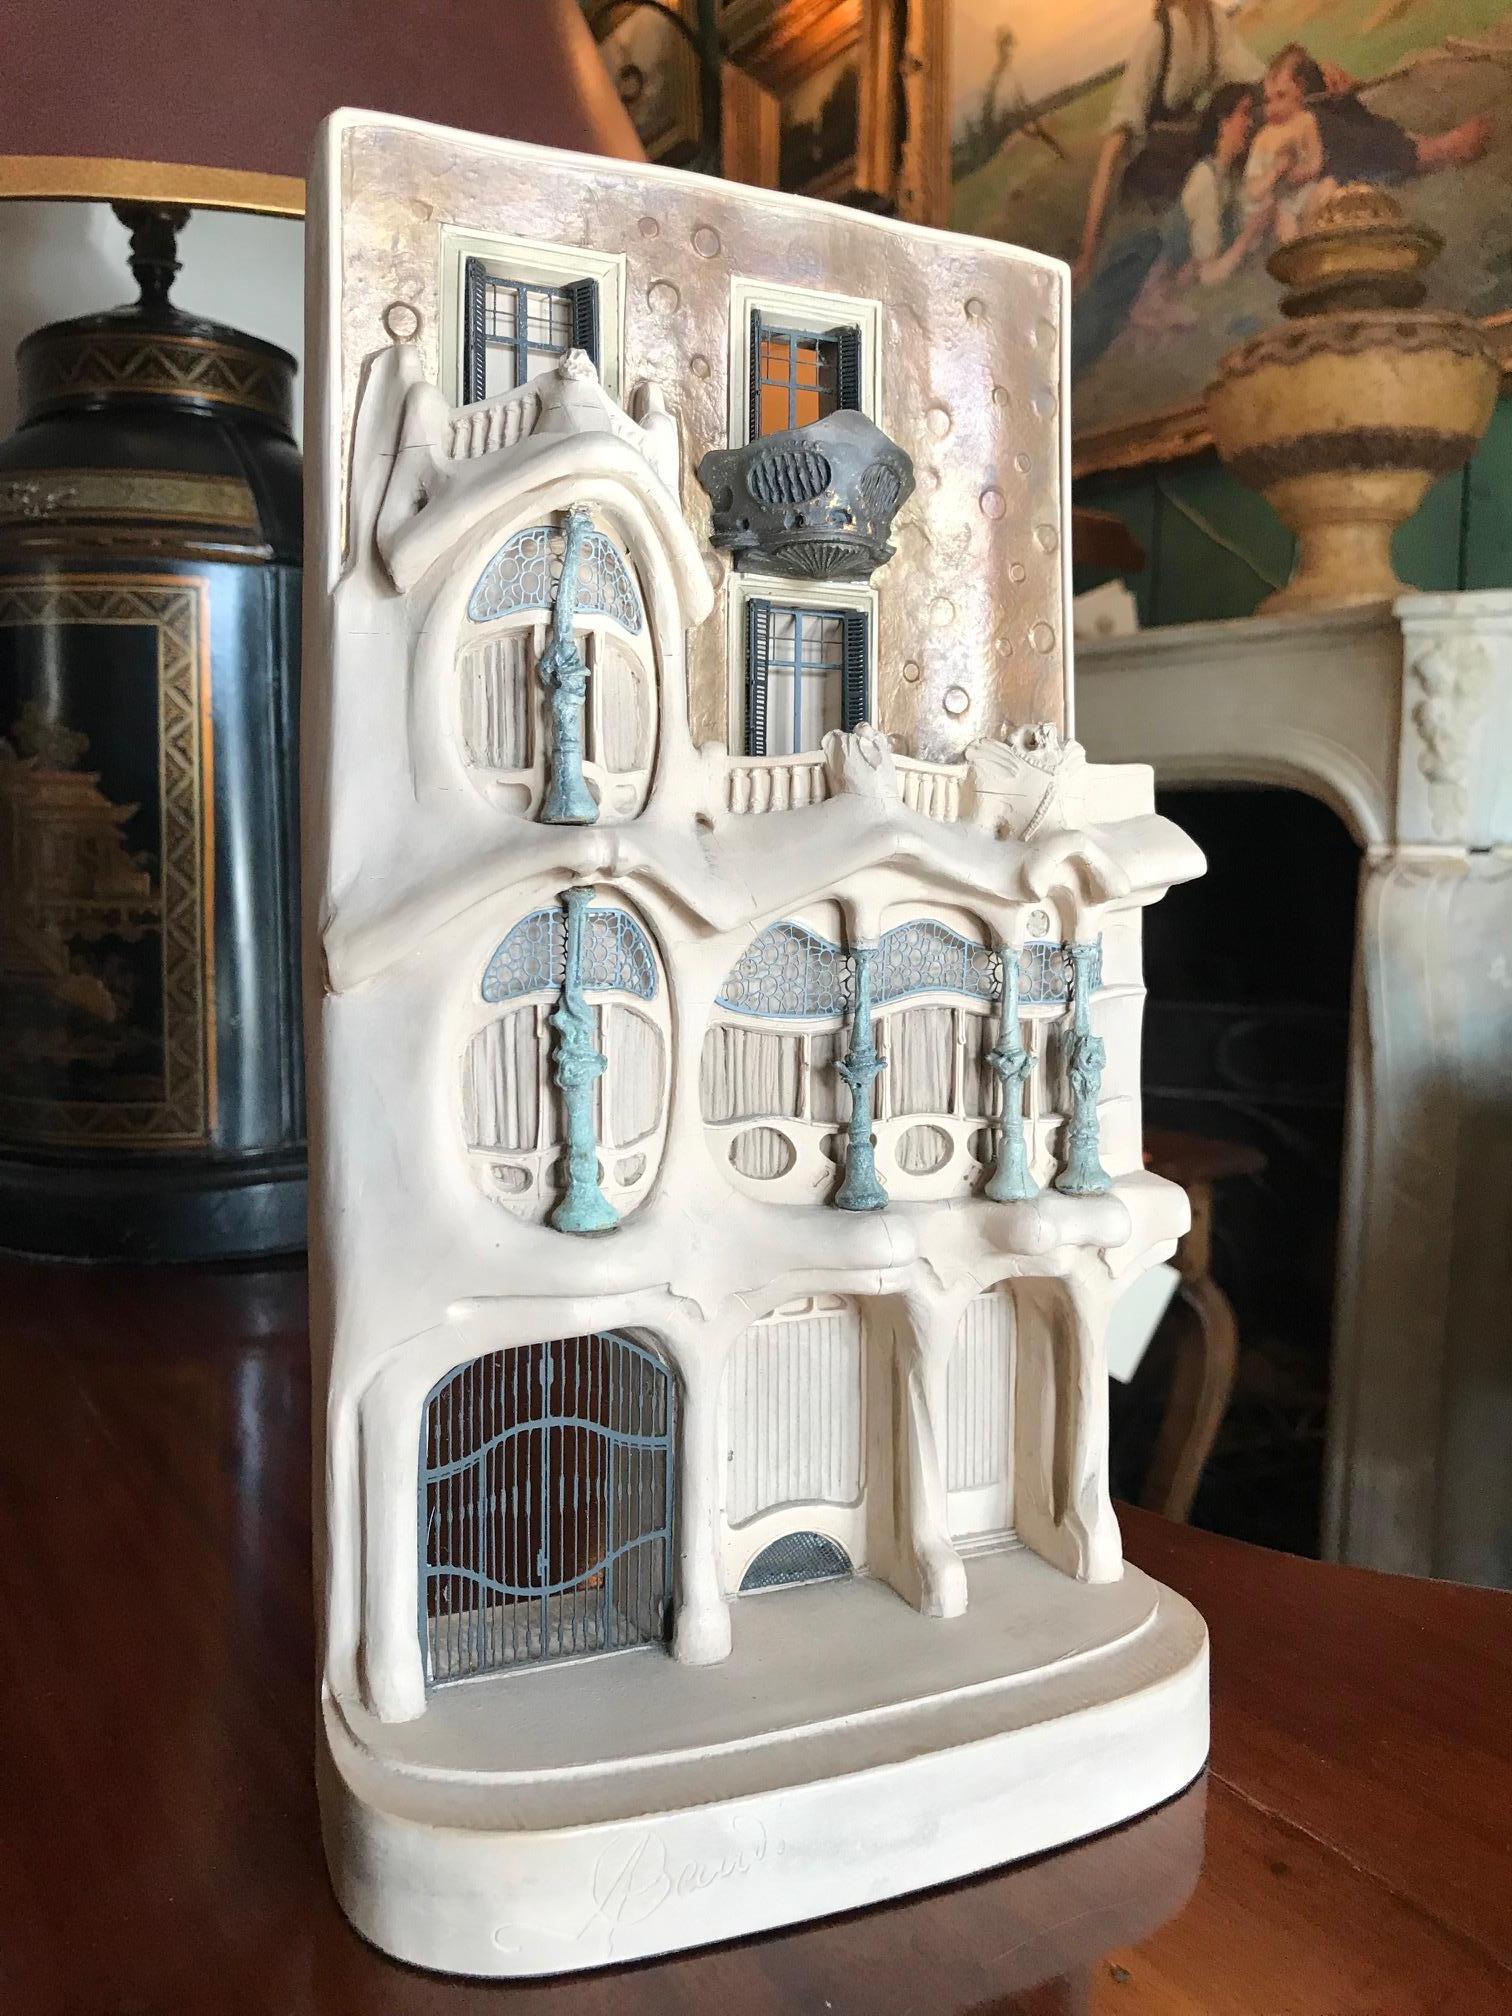 Model of Casa Battlo Gaudi Barcelona plaster architectural Biblot maquette
Very beautiful decorative element of Casa Batlló Battlo is a building in the center of Barcelona. It was designed by Antoni Gaudi and is considered one of his